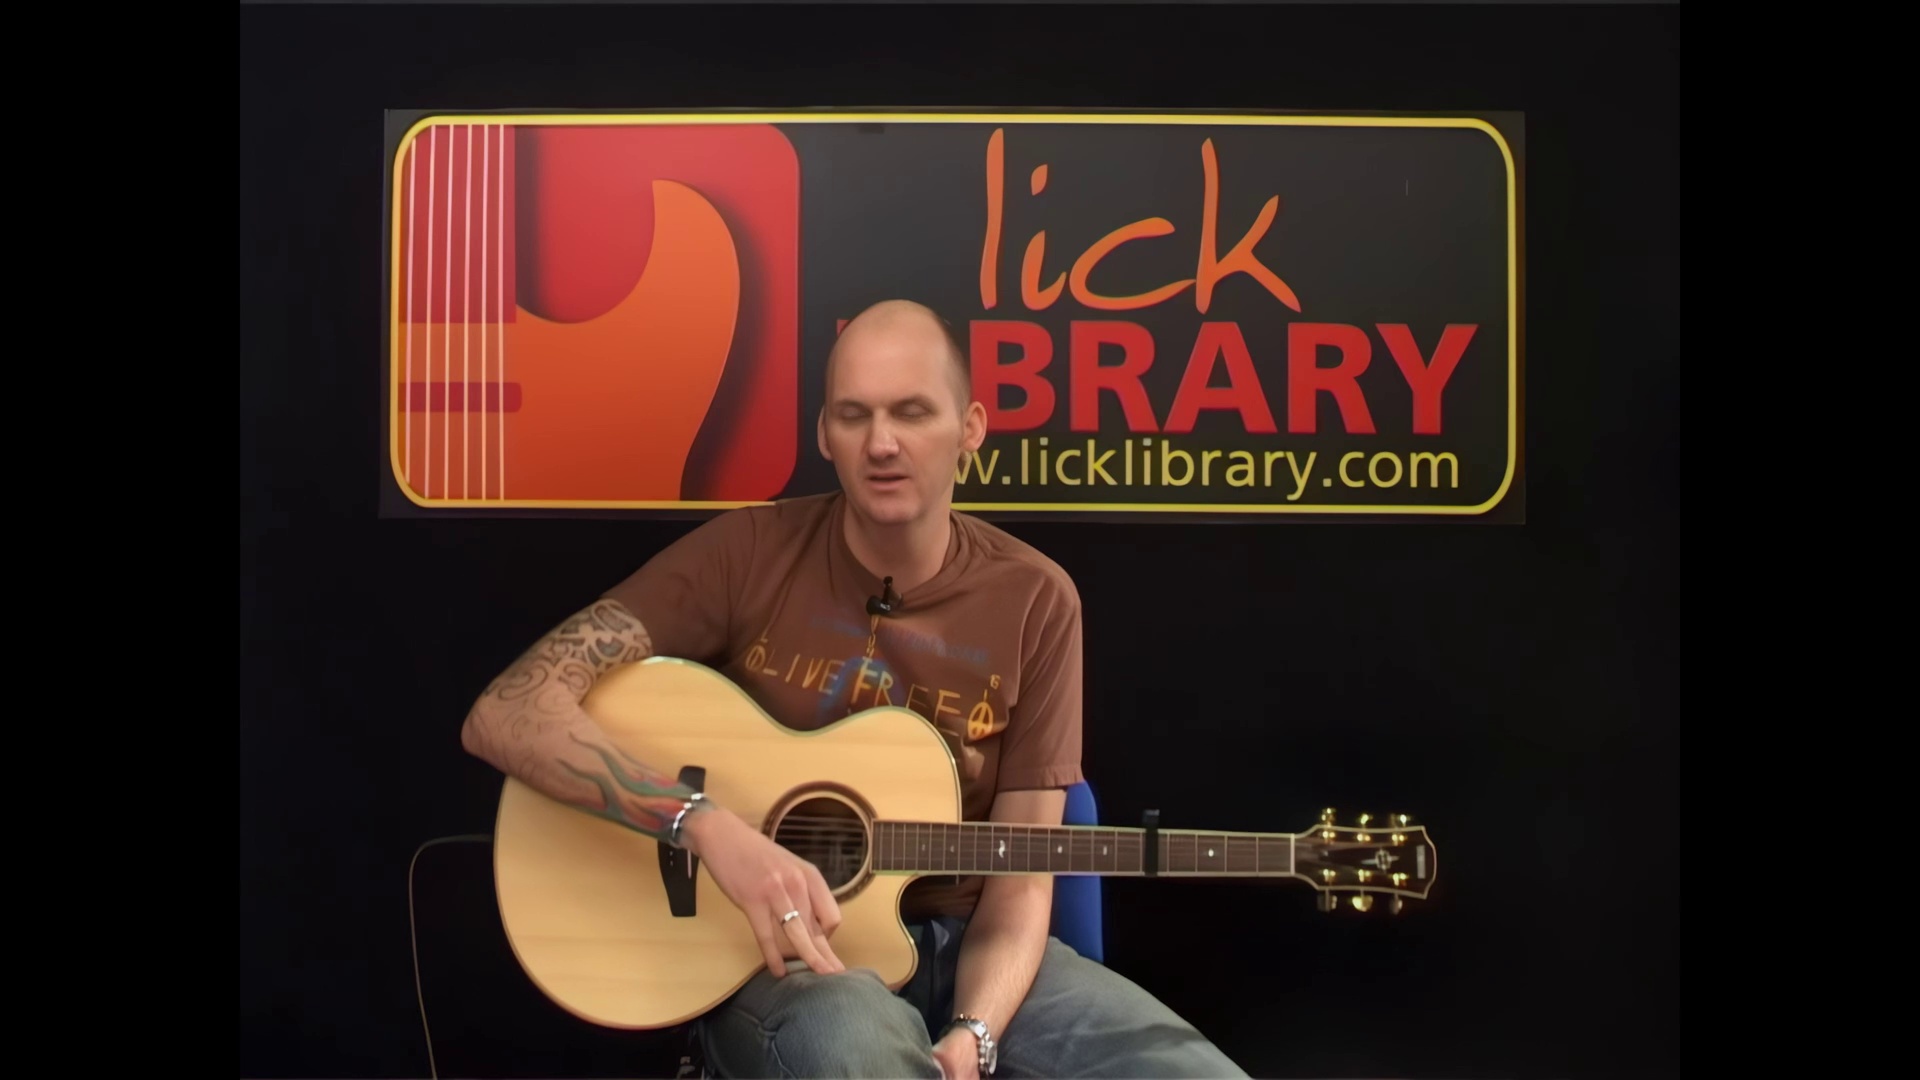 Learn To Play David Gray, James Blunt & Damien Rice